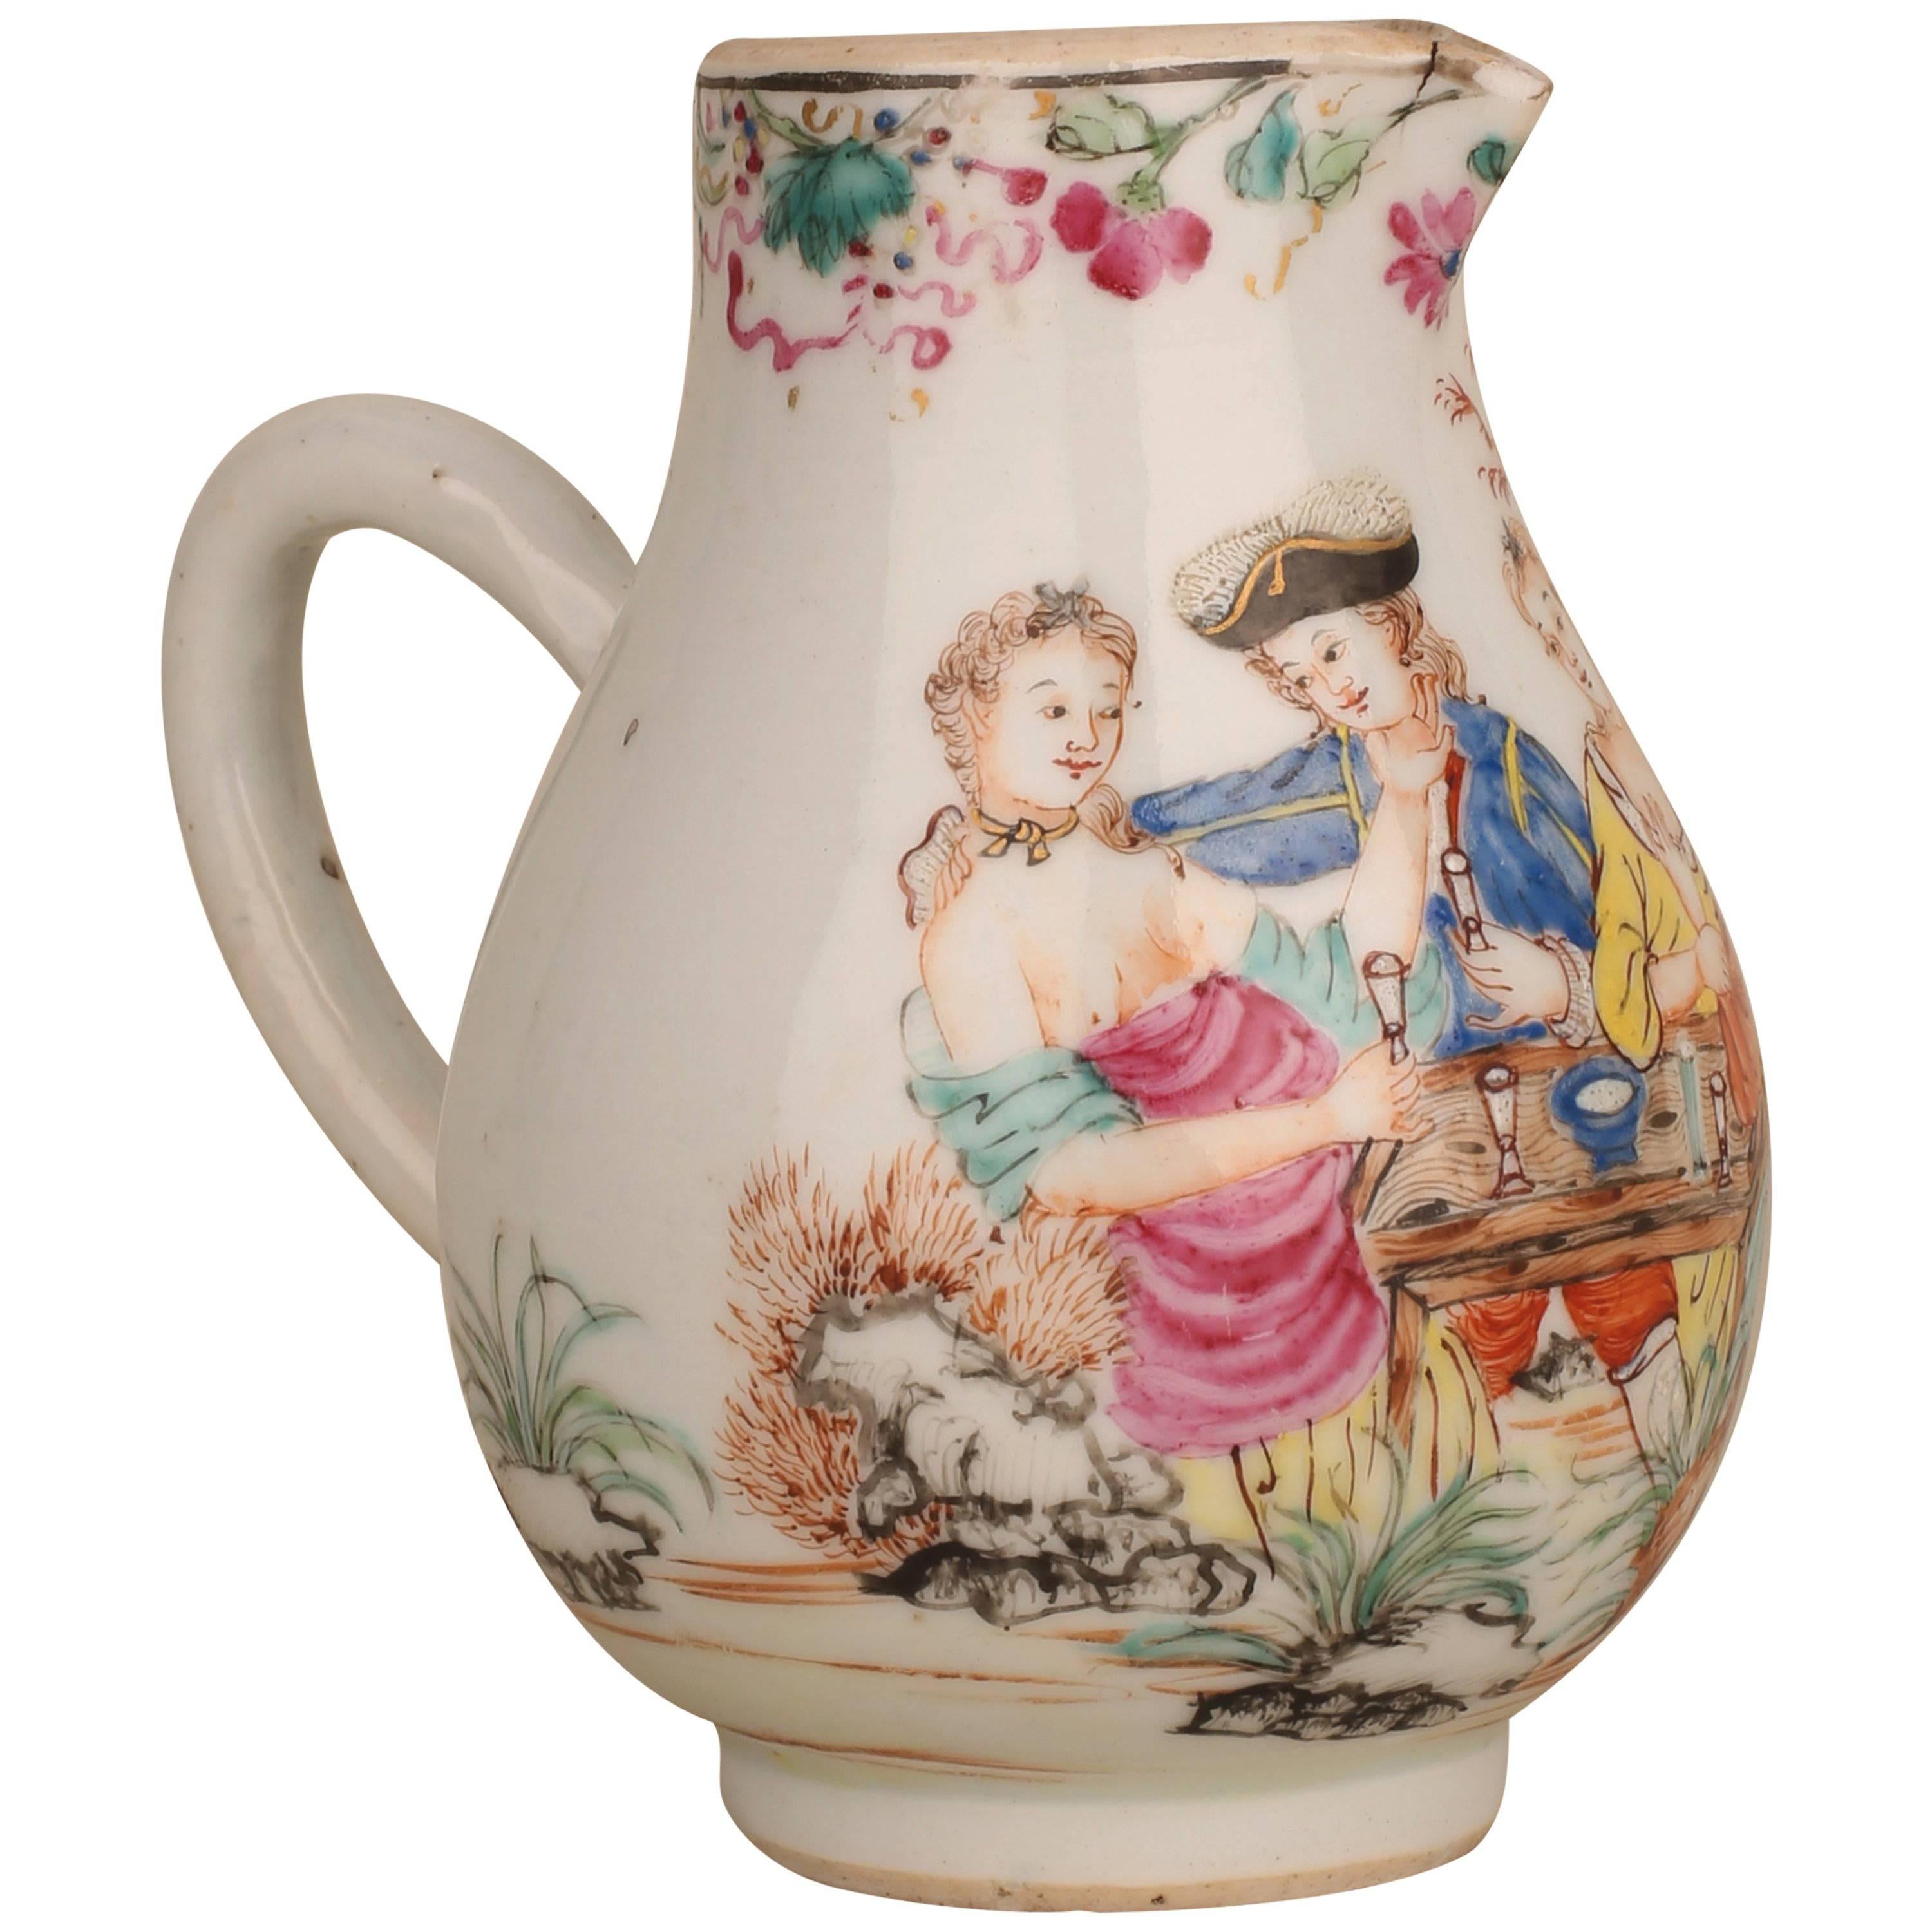 Chinese Porcelain Cream Jug with Two European Amorous Couples, 18th Century